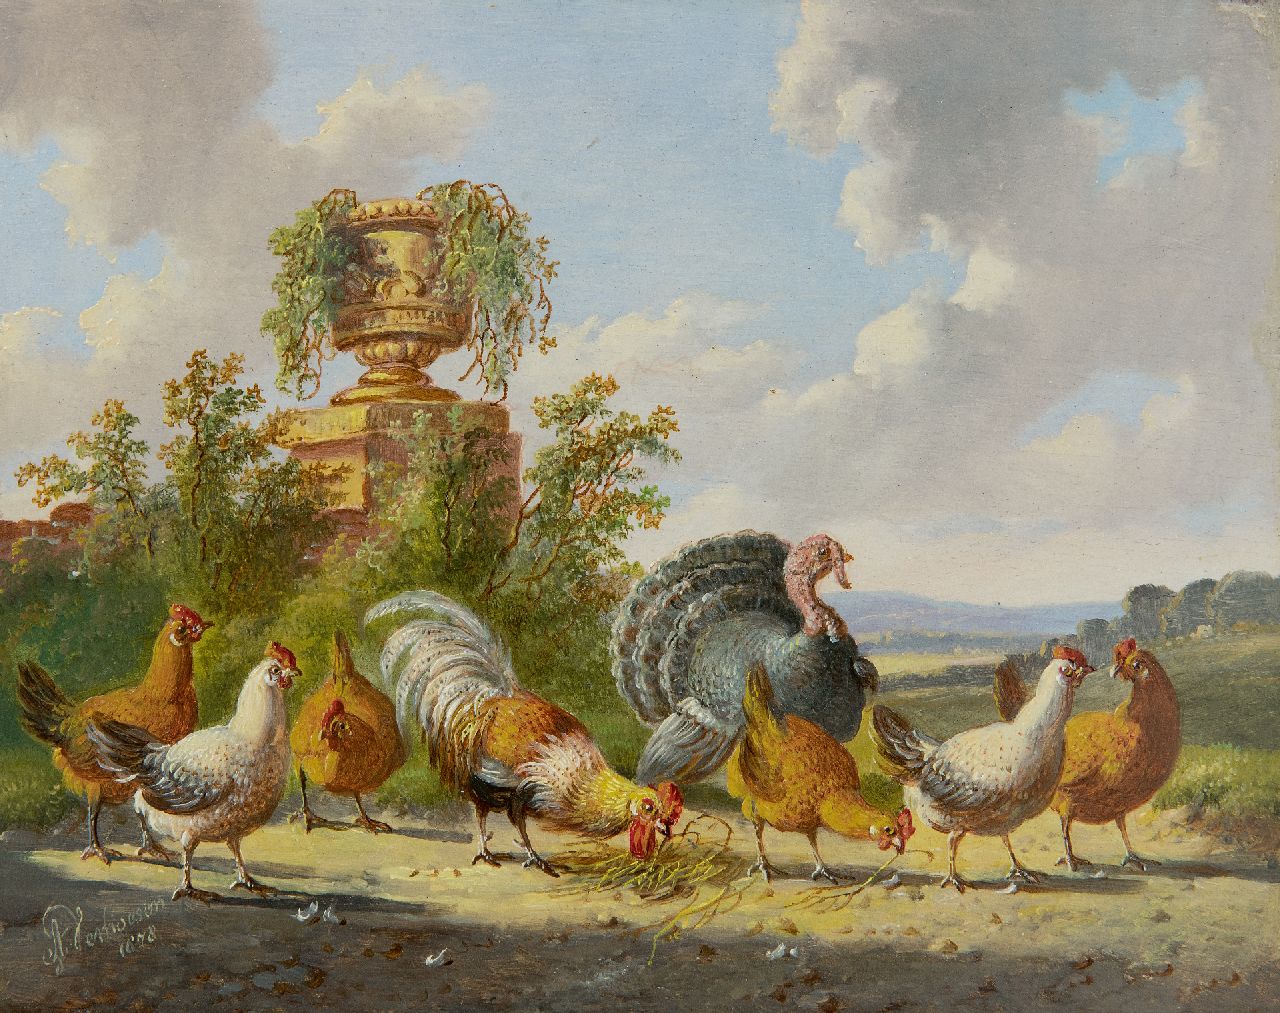 Verhoesen A.  | Albertus Verhoesen | Paintings offered for sale | Poultry in a landscape, oil on panel 14.3 x 18.6 cm, signed l.l. and dated 1878